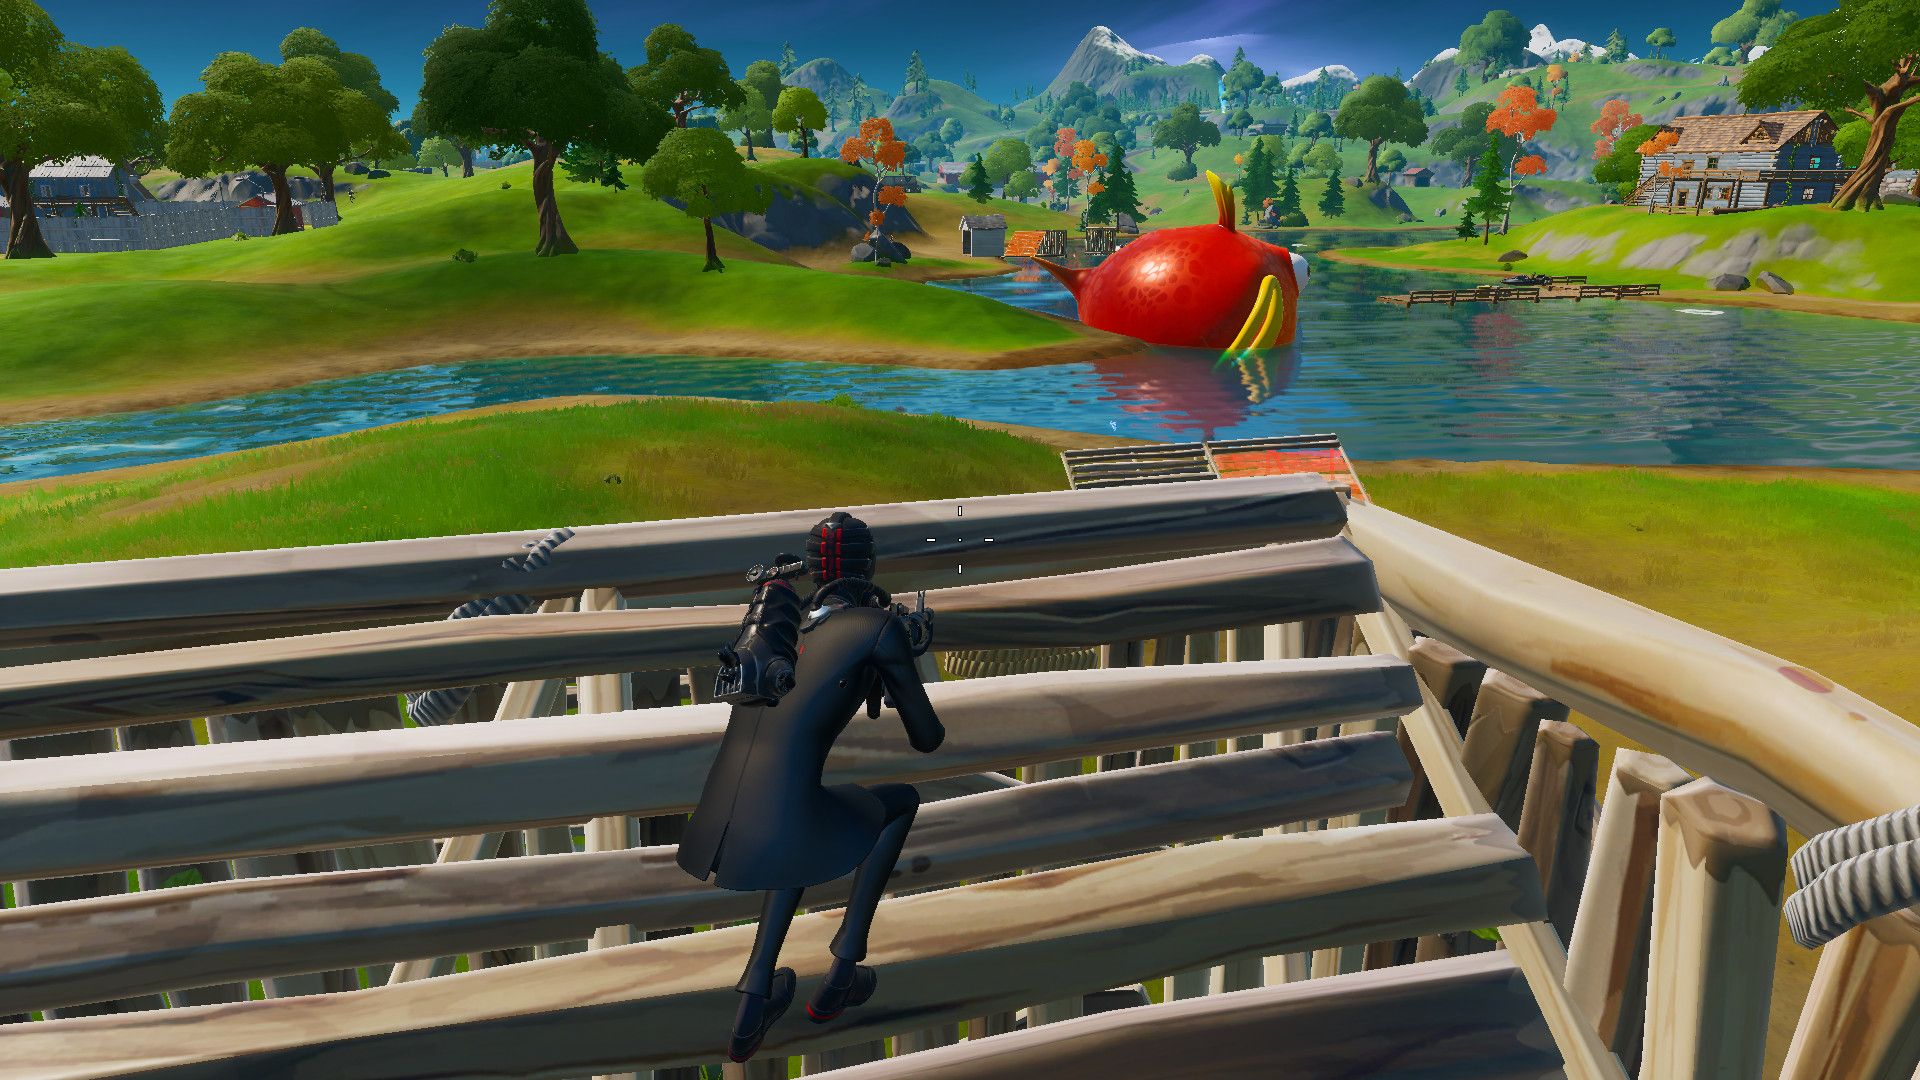 The Hilarious Fortnite Bug That Turns Players Into Gigantic